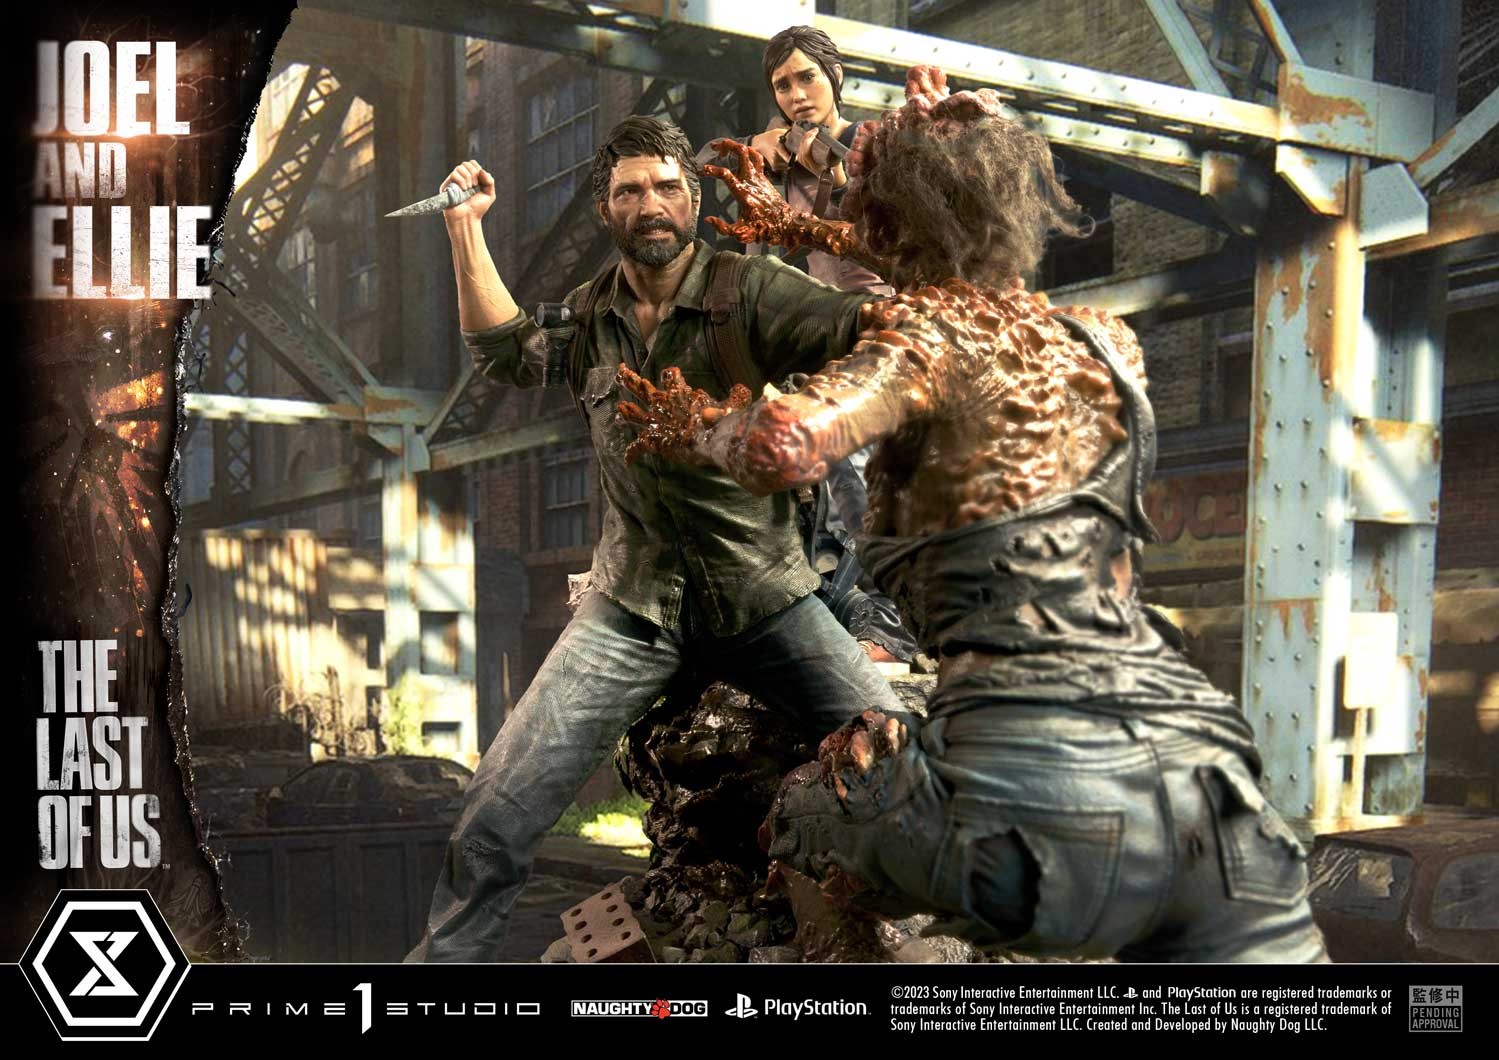 The Last of Us Special Edition comes in Joel and Ellie versions